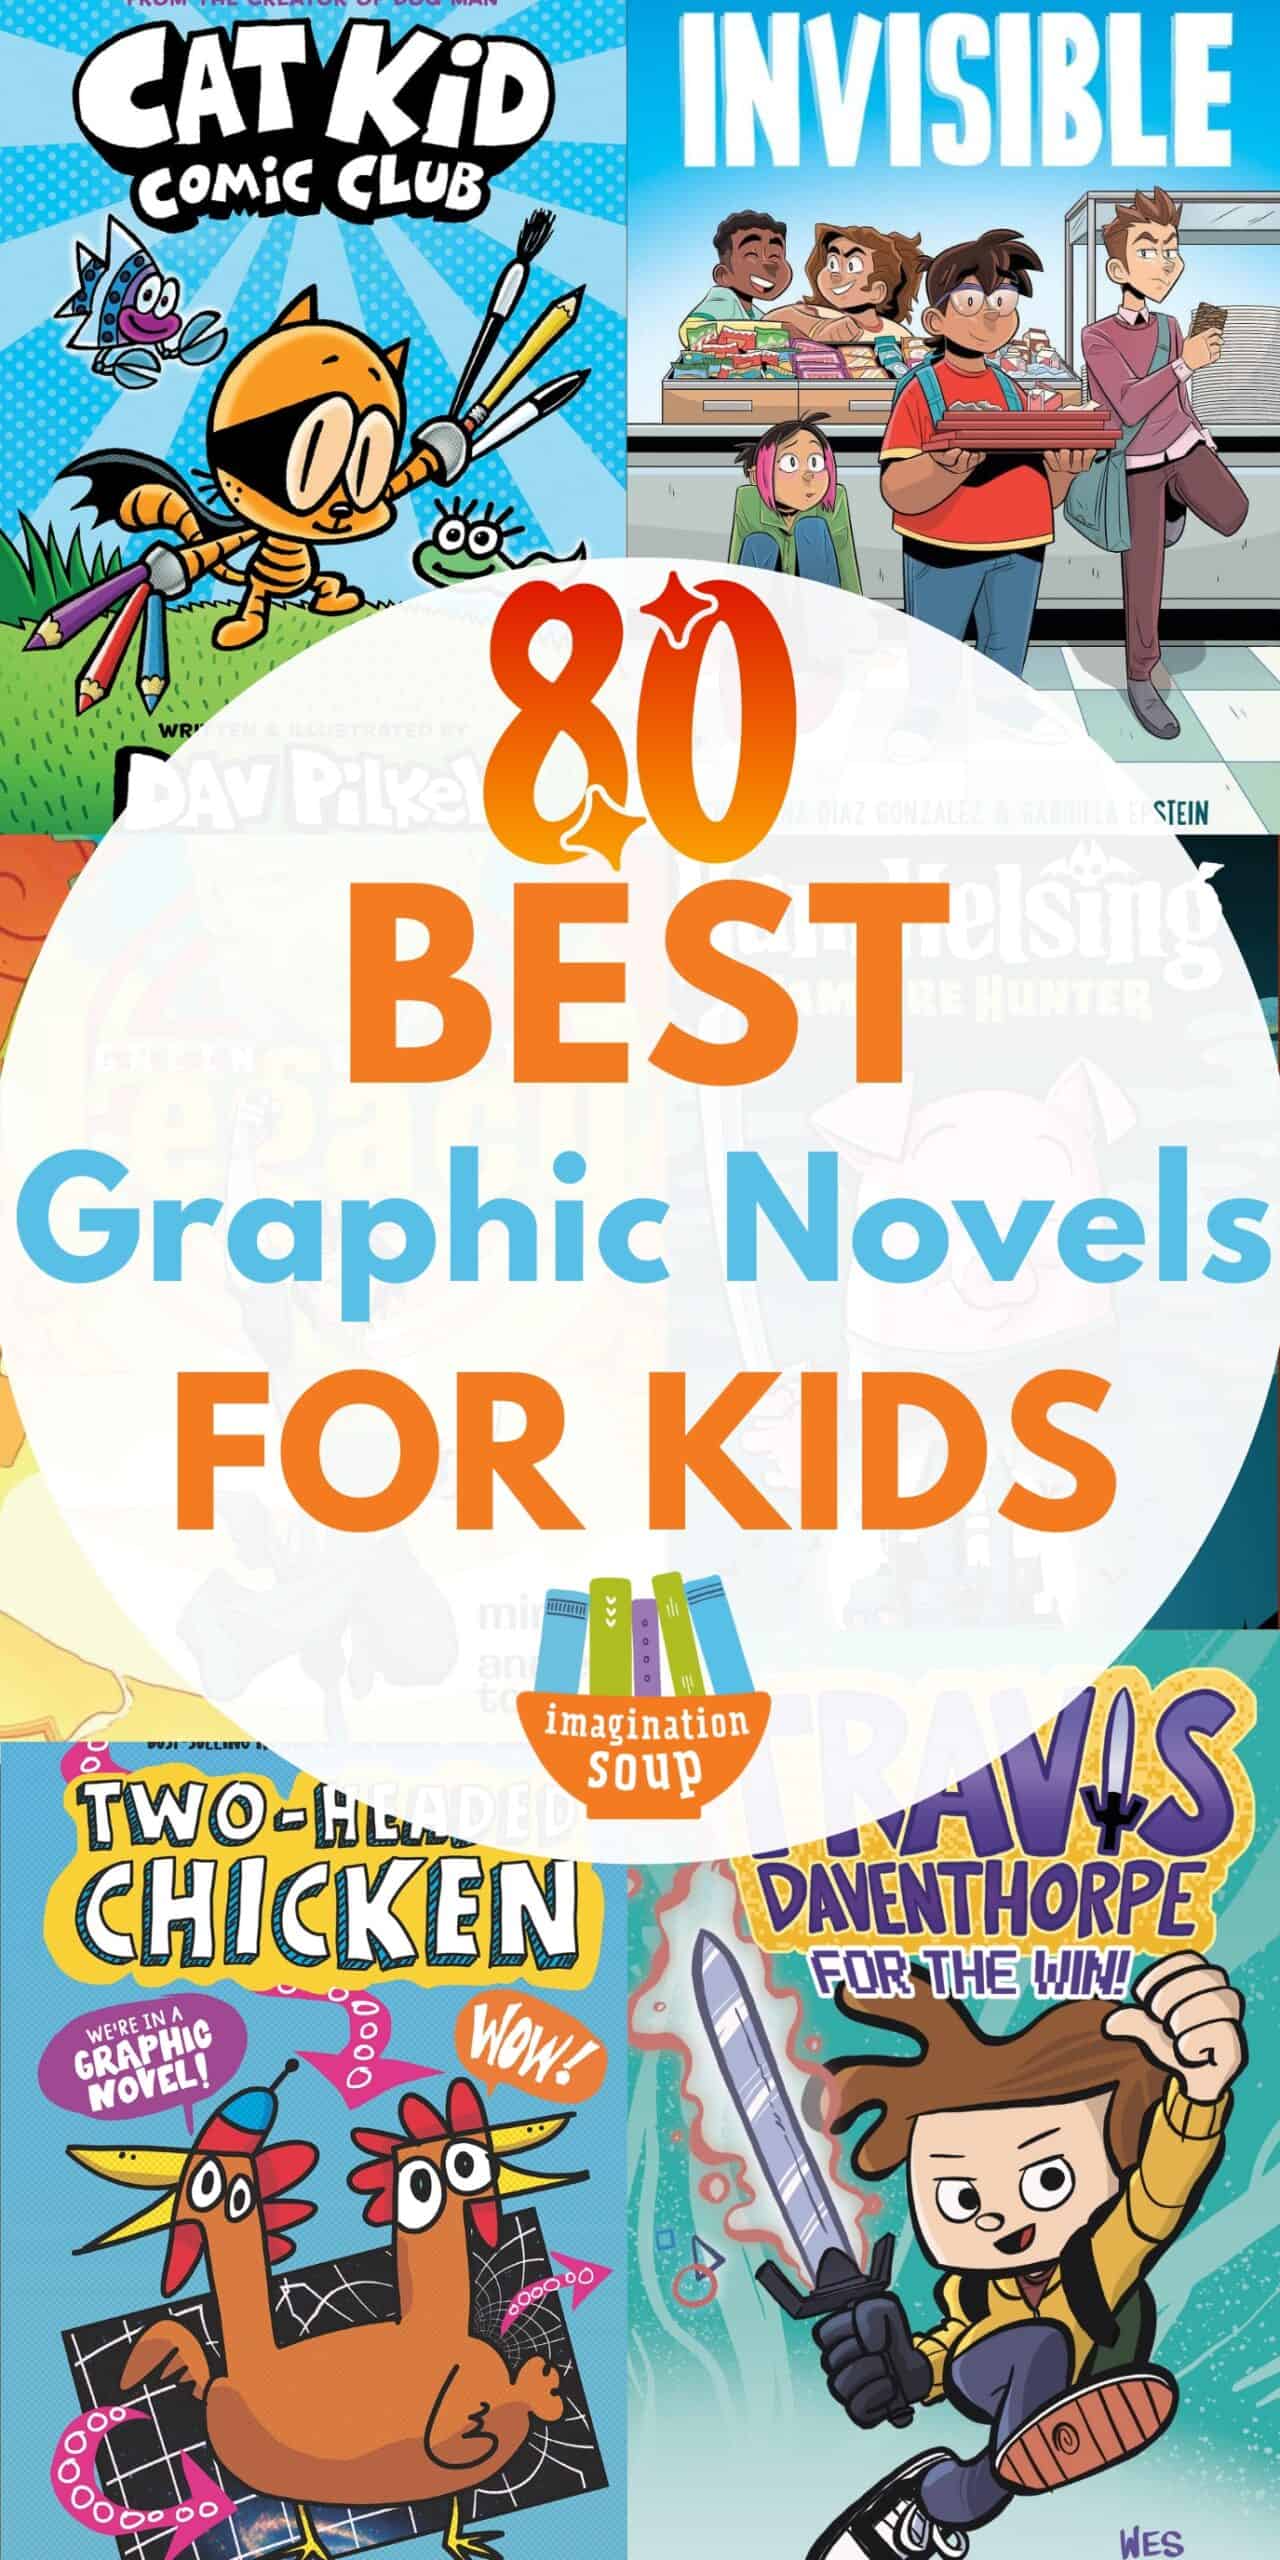 There are so many good graphic novels, how can you pick the best graphic novels for kids? This created book list of recommendations and reviews will help you find the right book for each kid in your life, whether you're a parent, teacher, librarian, or grandparent. Let's dive into graphic novels!

The graphic novel format entices kids into stories with illustrated comics and compelling plots told primarily through dialogue. I love that kids (mine included) get excited to read, read, read because they love the illustrated format. Don't you?